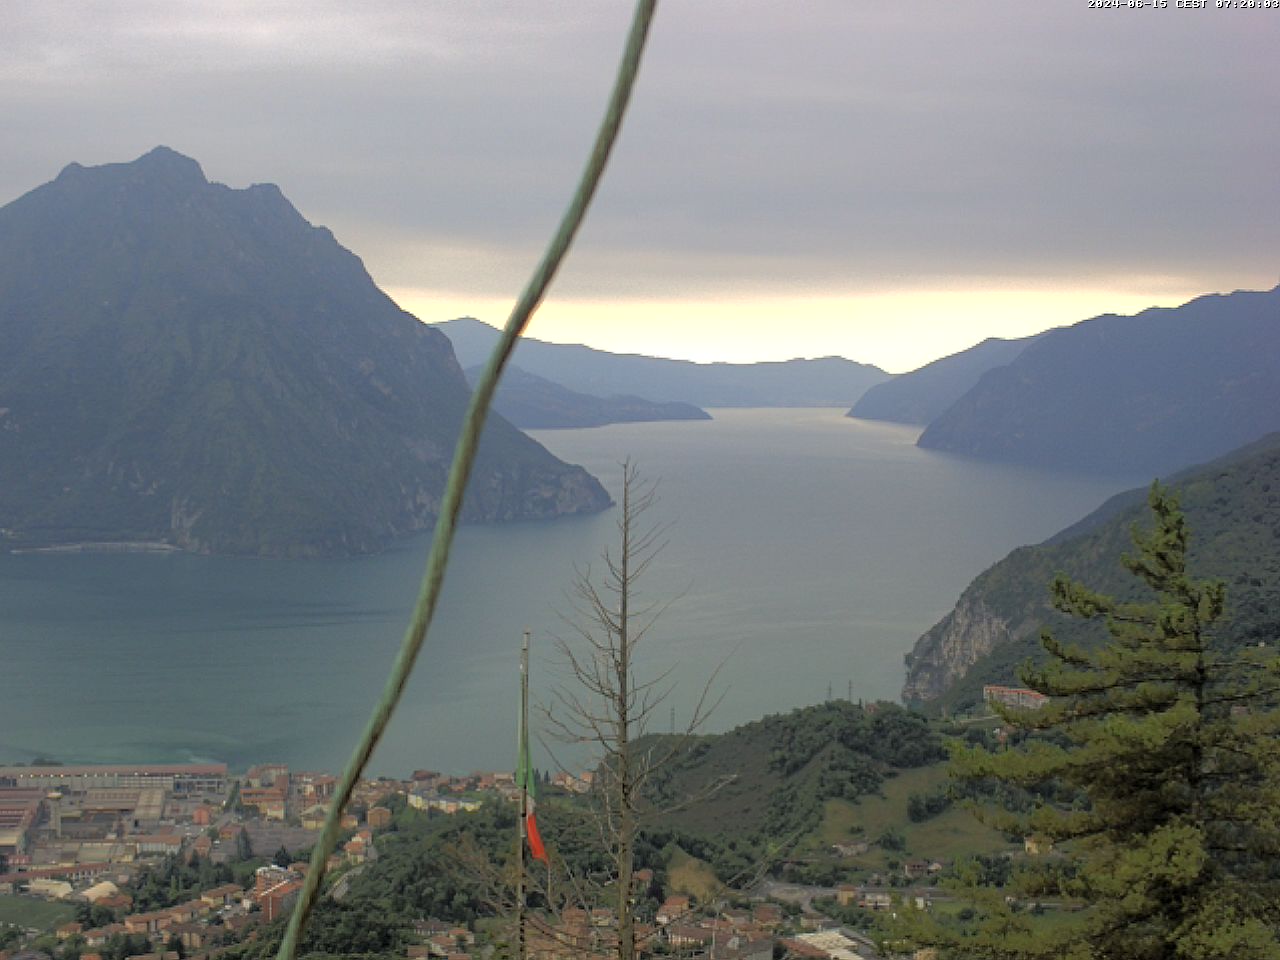 Lovere (Lac d'Iseo) Me. 07:29